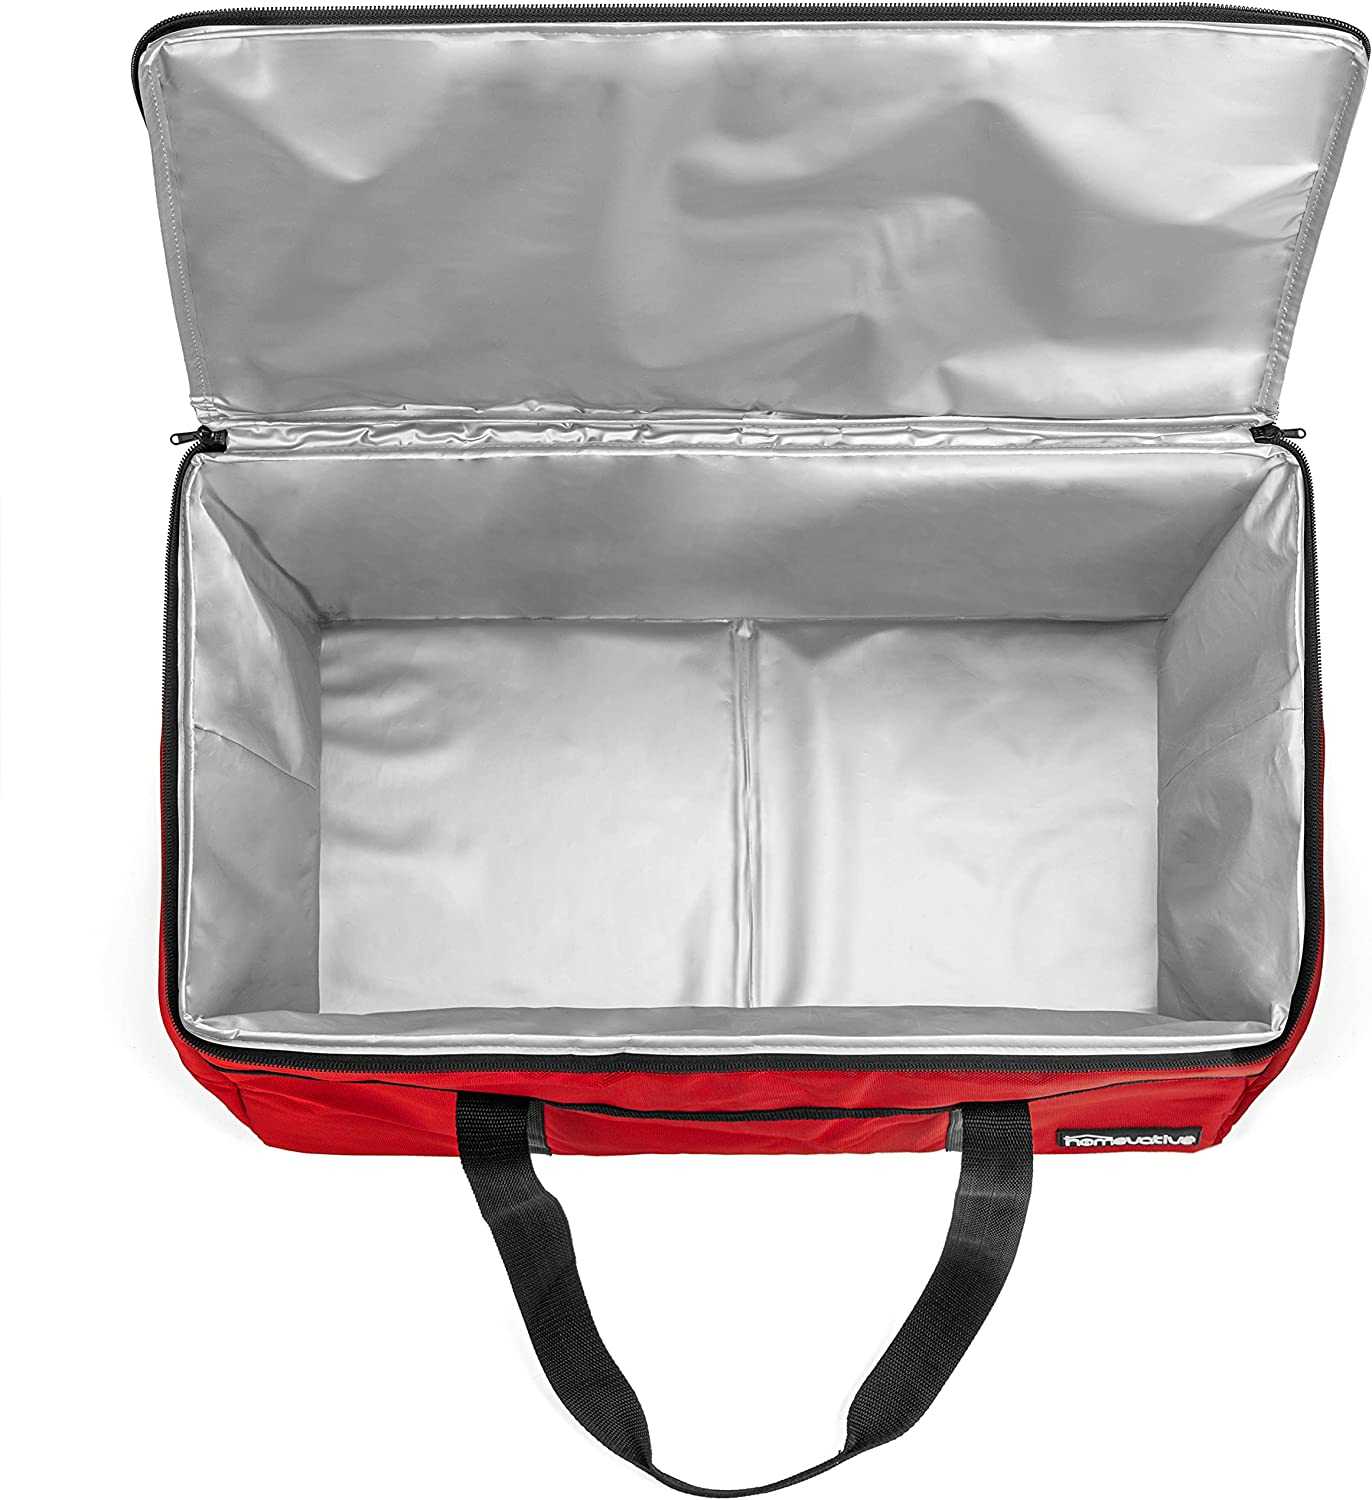 Cooler bags for frozen food